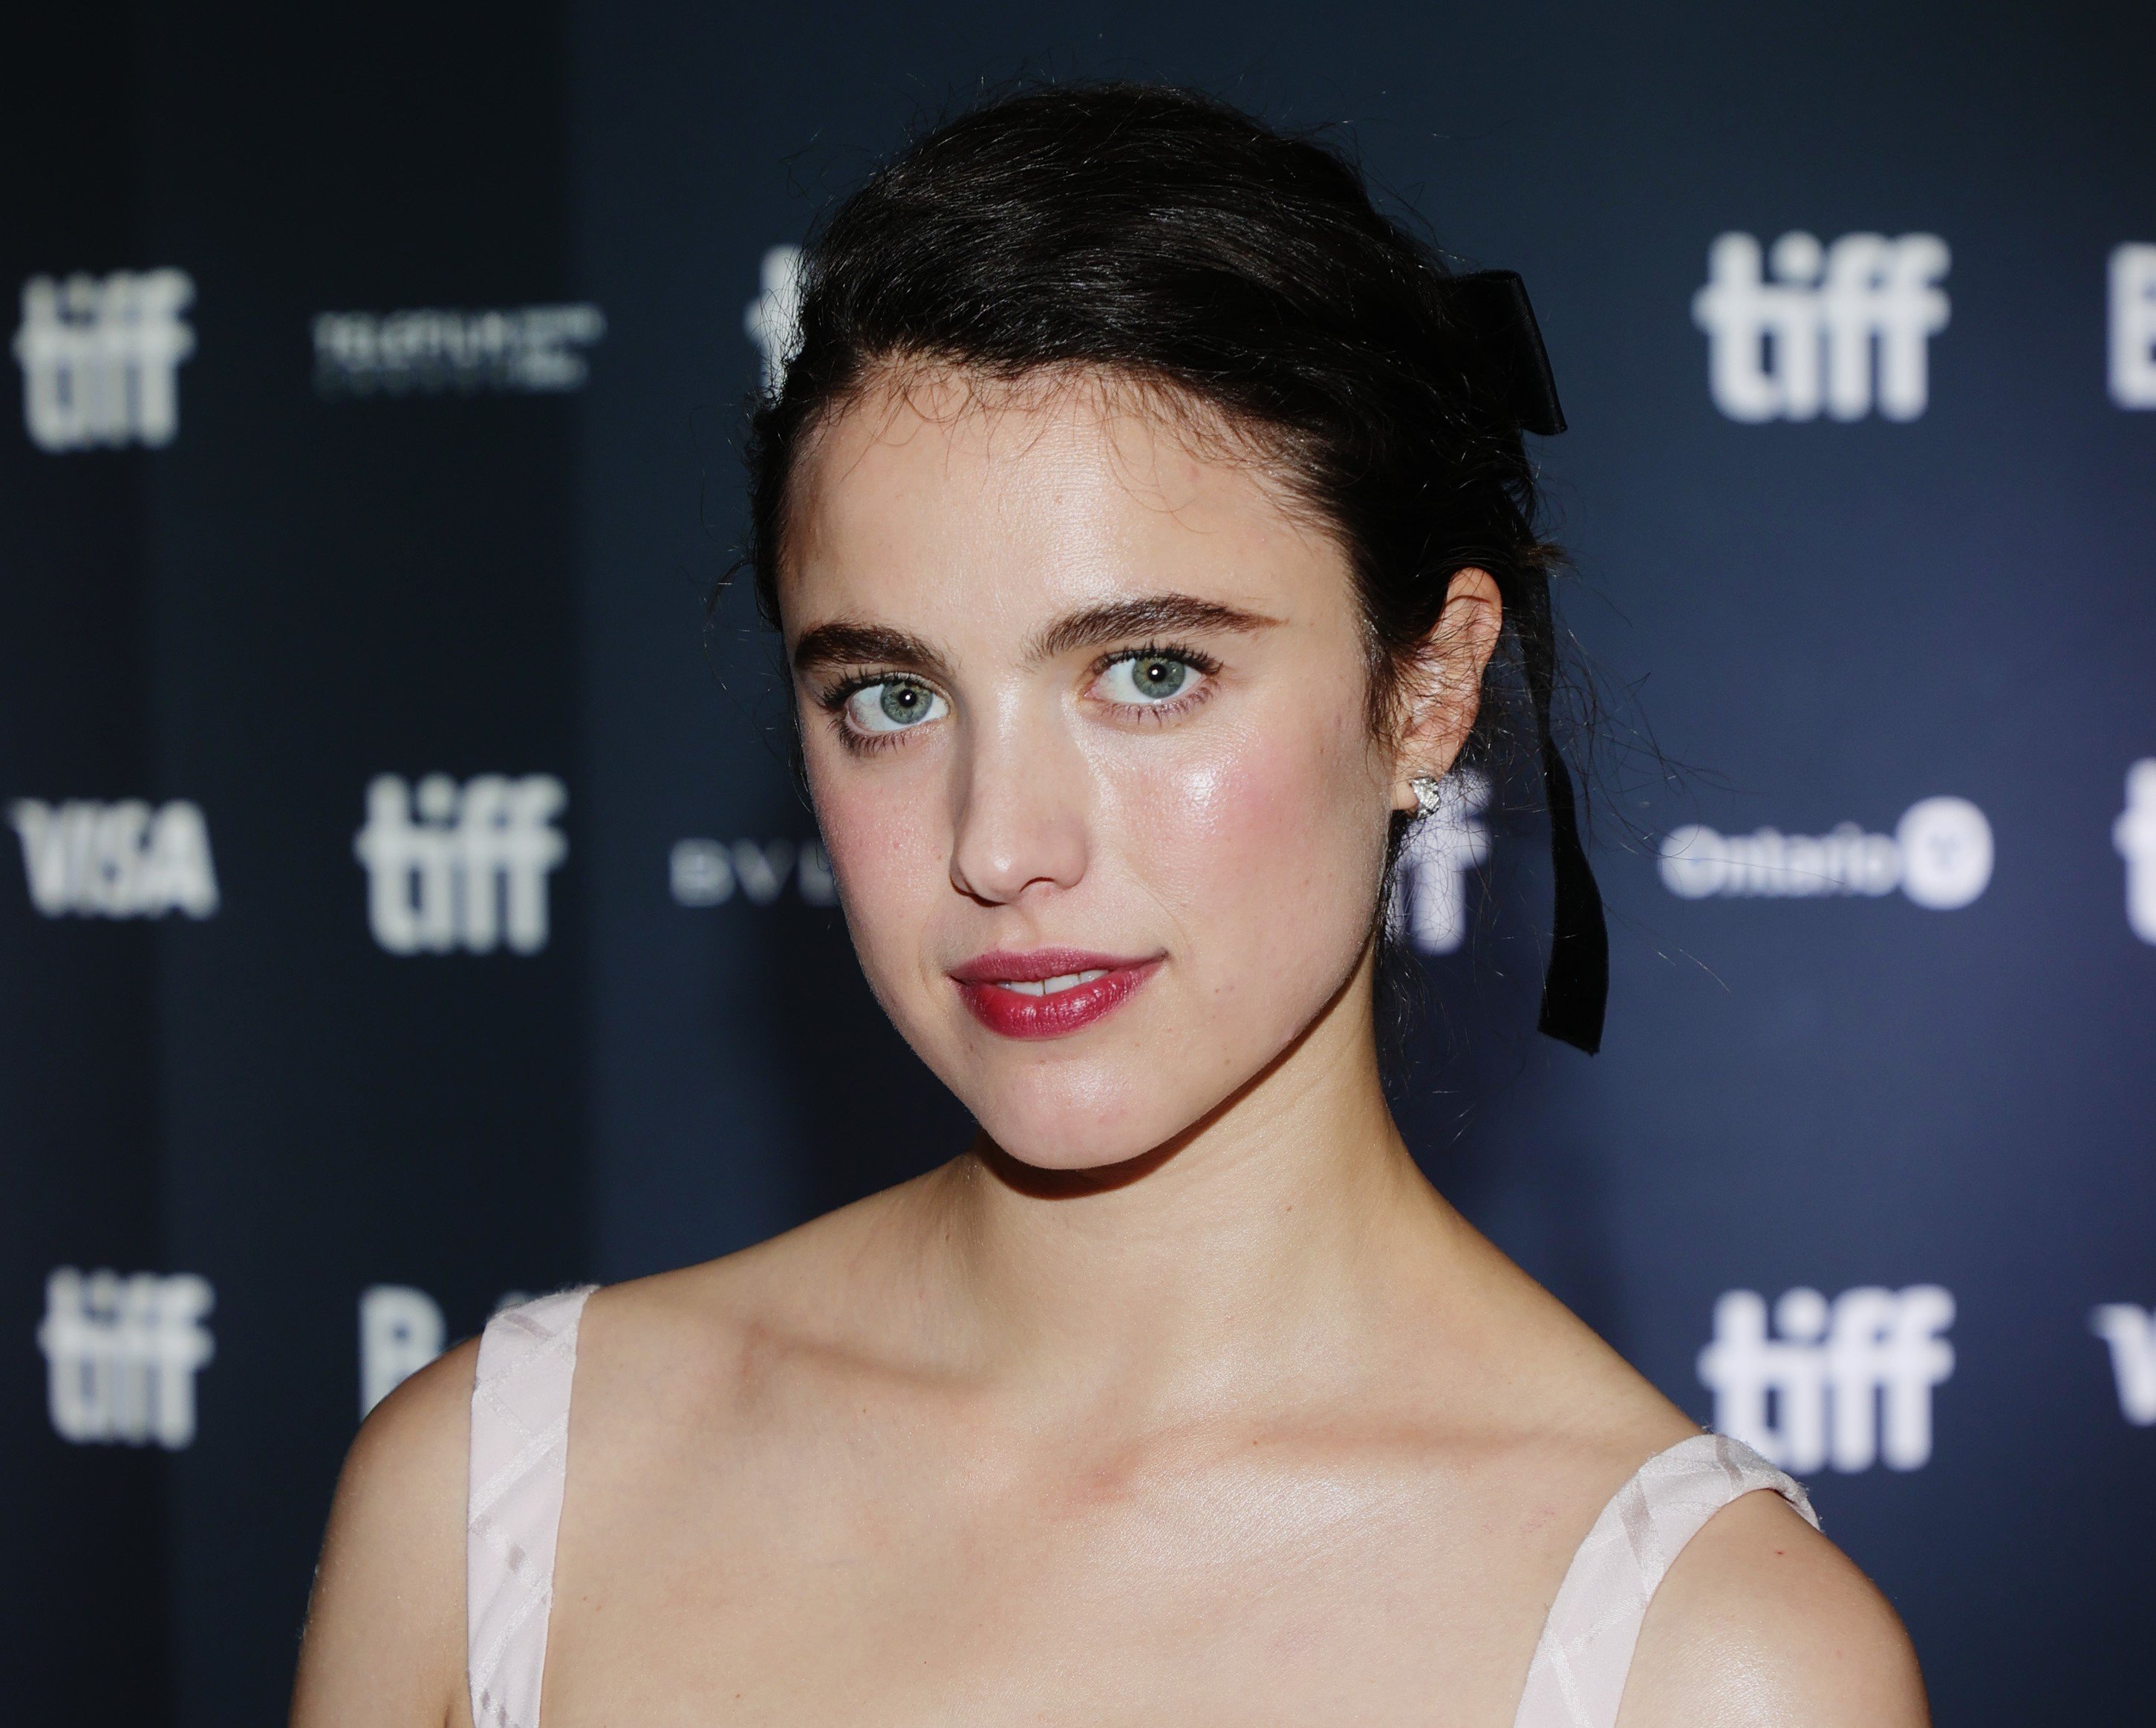 Margaret Qualley at the "Sanctuary" premiere at the 2022 Toronto International Film Festival. | Source: Getty Images